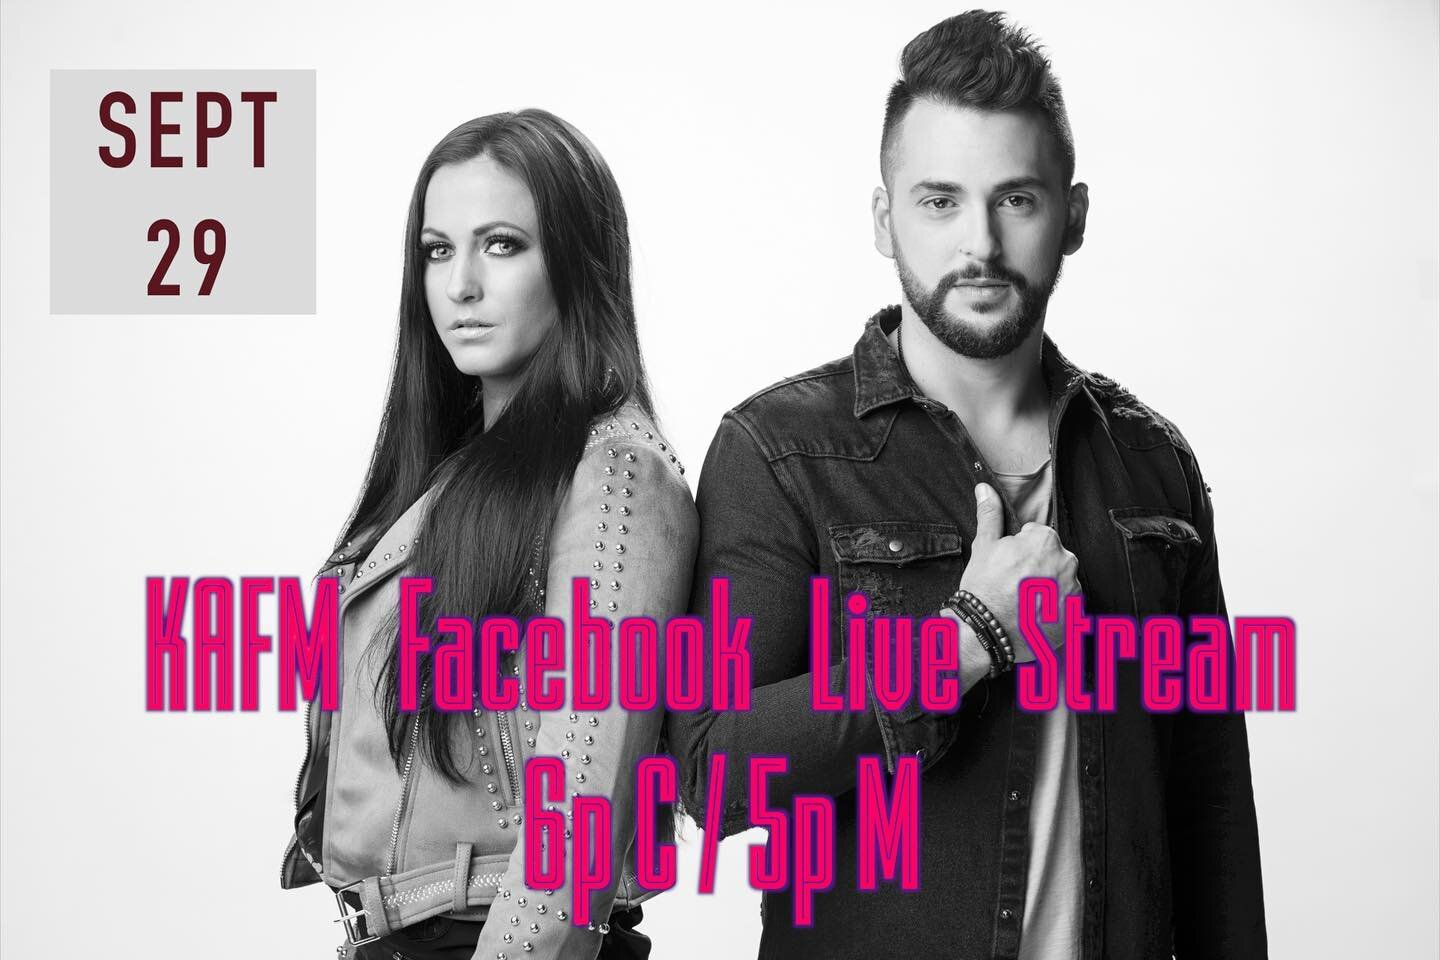 &bull; TONIGHT &bull; we are doing a live stream with KAFM on their Facebook at 6PM CT! Come hang for music + updates on everything Henley! 
.
.
.
.
#KAFM #henley #wearehenley #facebooklive #live #music #countrymusic